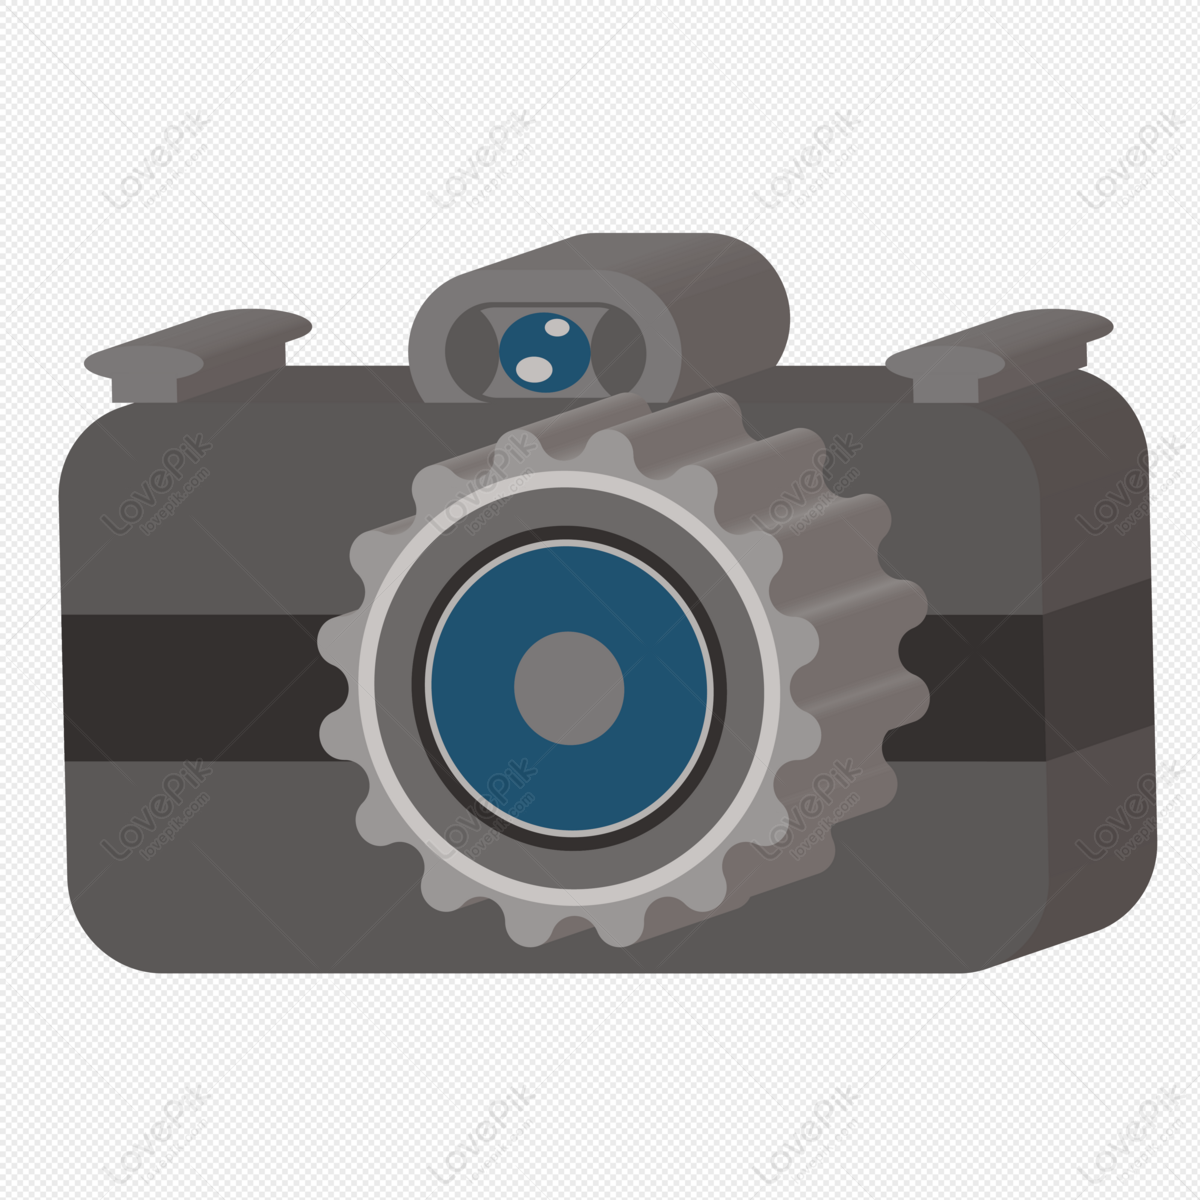 Cartoon Camera PNG Image And Clipart Image For Free Download - Lovepik |  401325518